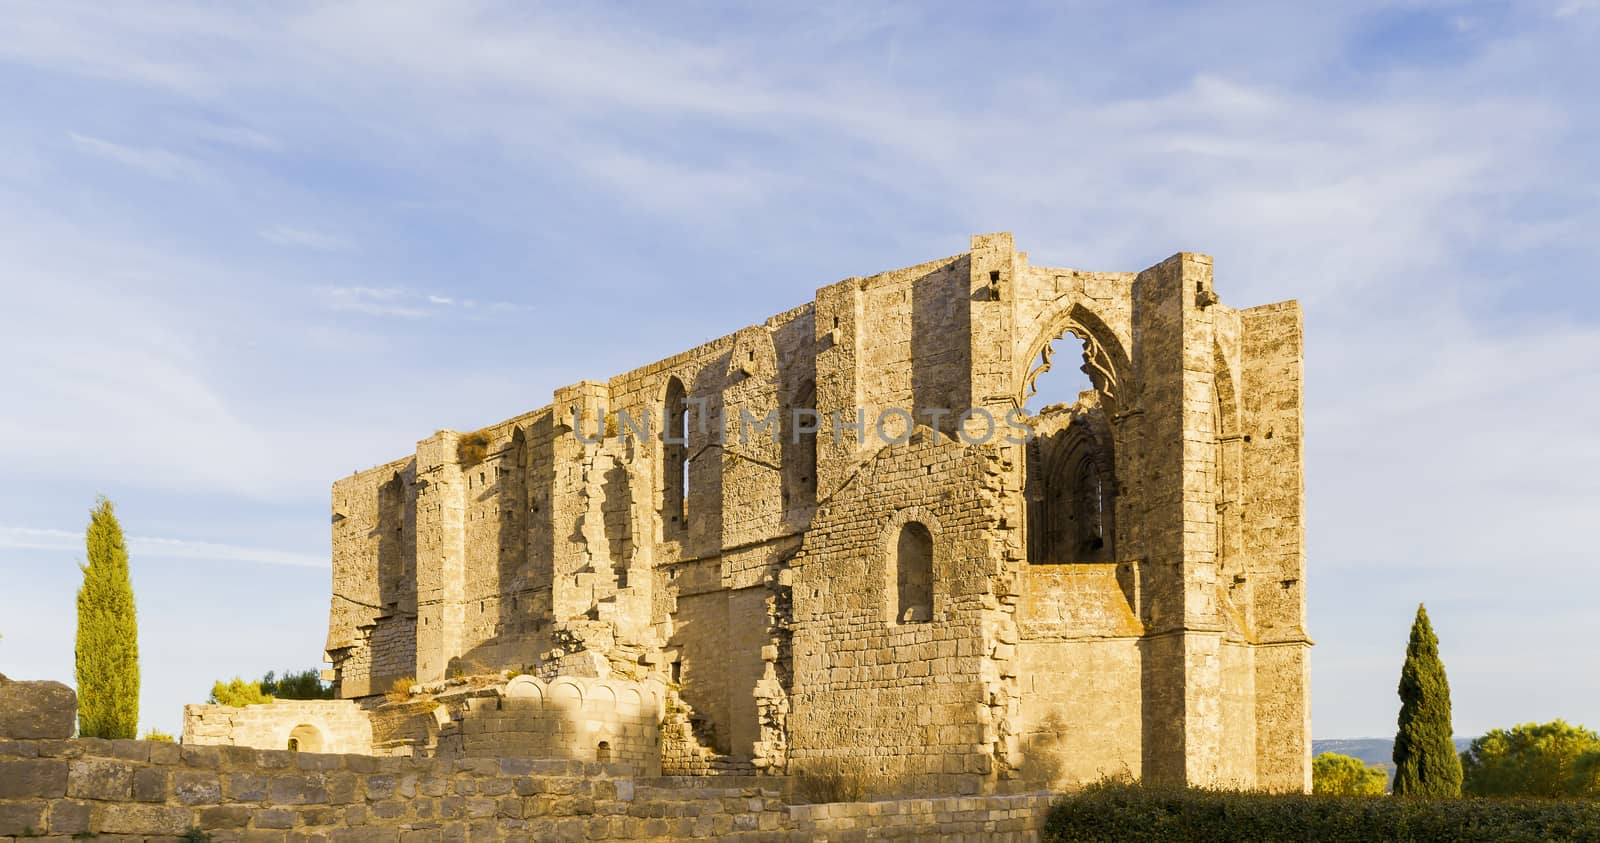 The abbey consisted of several buildings organized around a cloister: a small Romanesque church, a refectory, a kitchen, a chapter house and various other annex buildings.